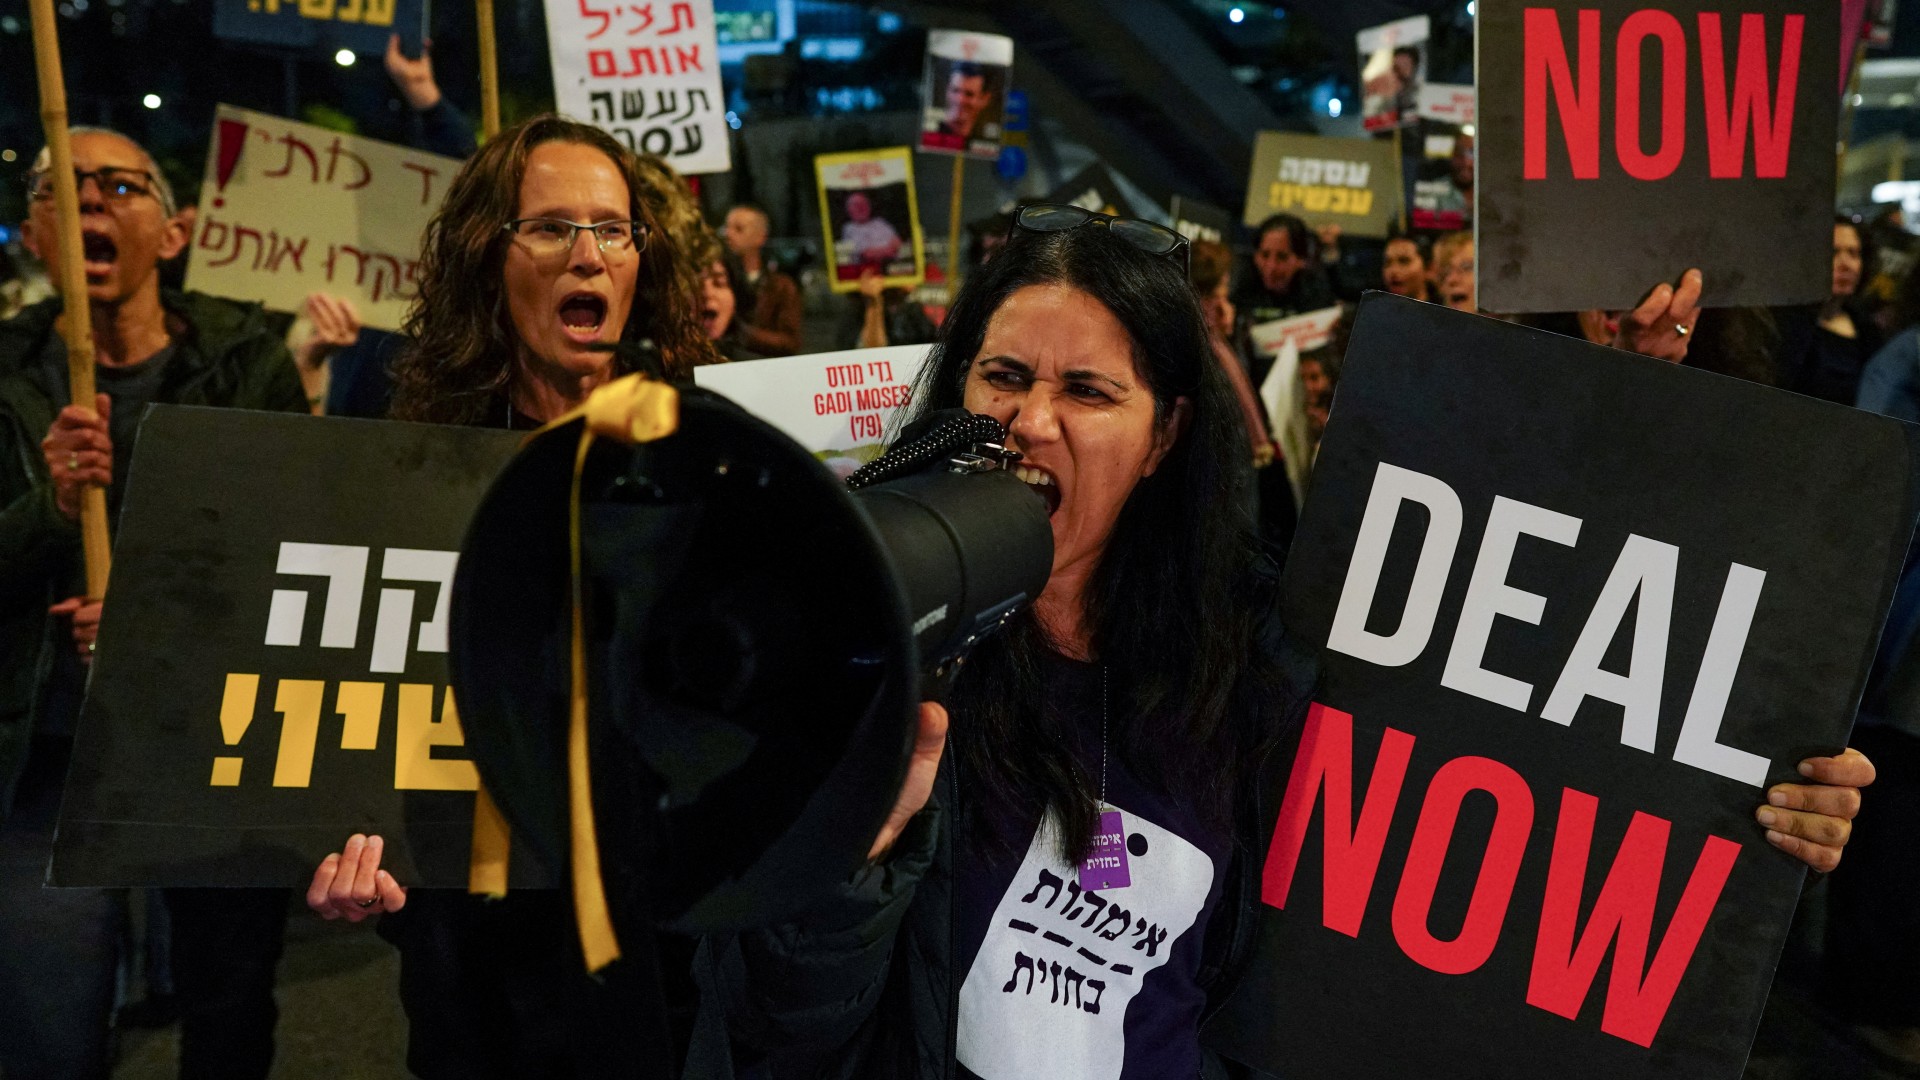 Families of captives and supporters block a road as they shout slogans during a protest in Tel Aviv, 18 January (Reuters/Alexandre Meneghini)